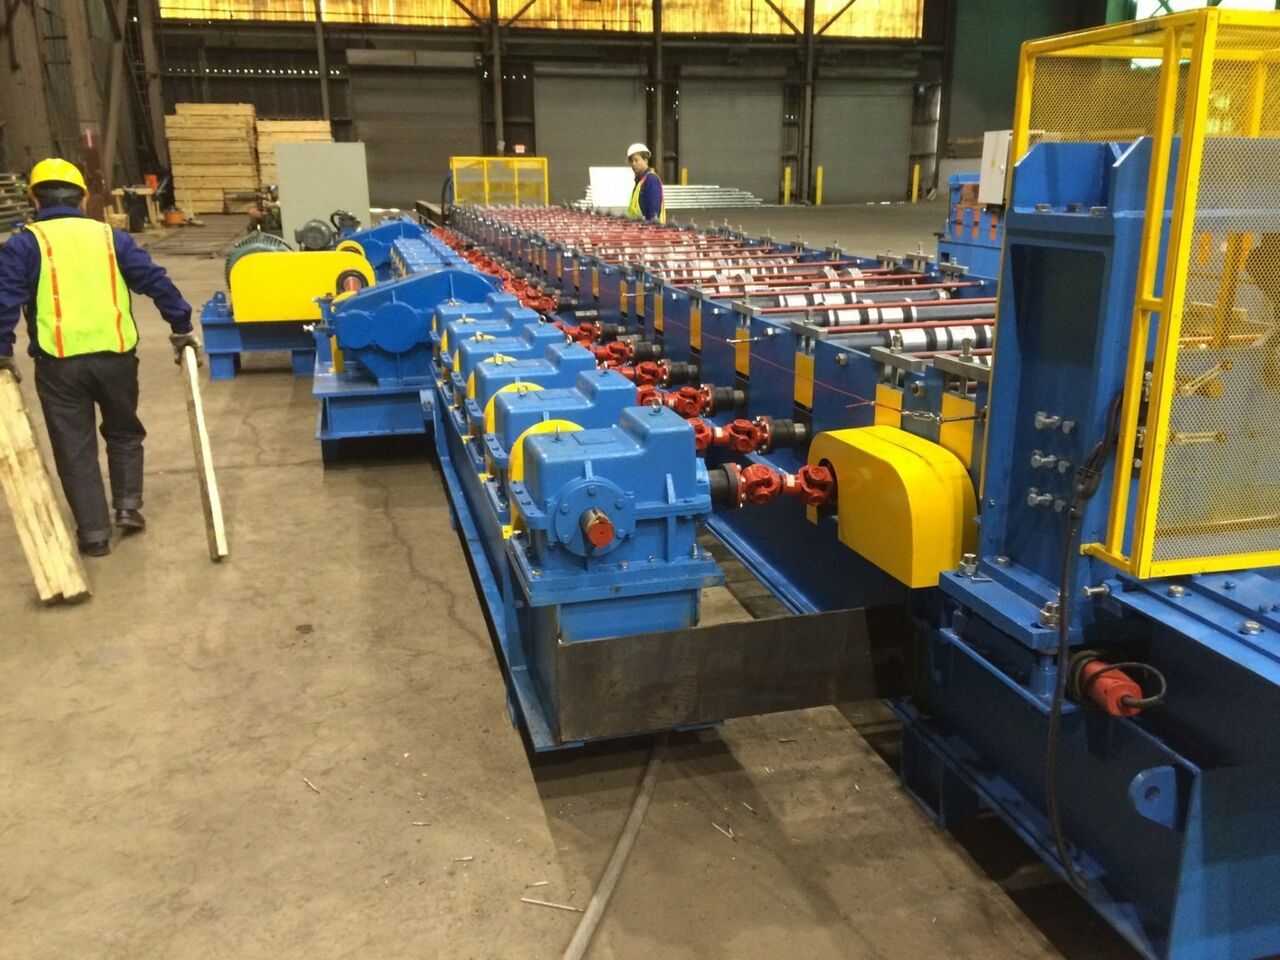 What are the main reasons people invest in roll forming equipment?